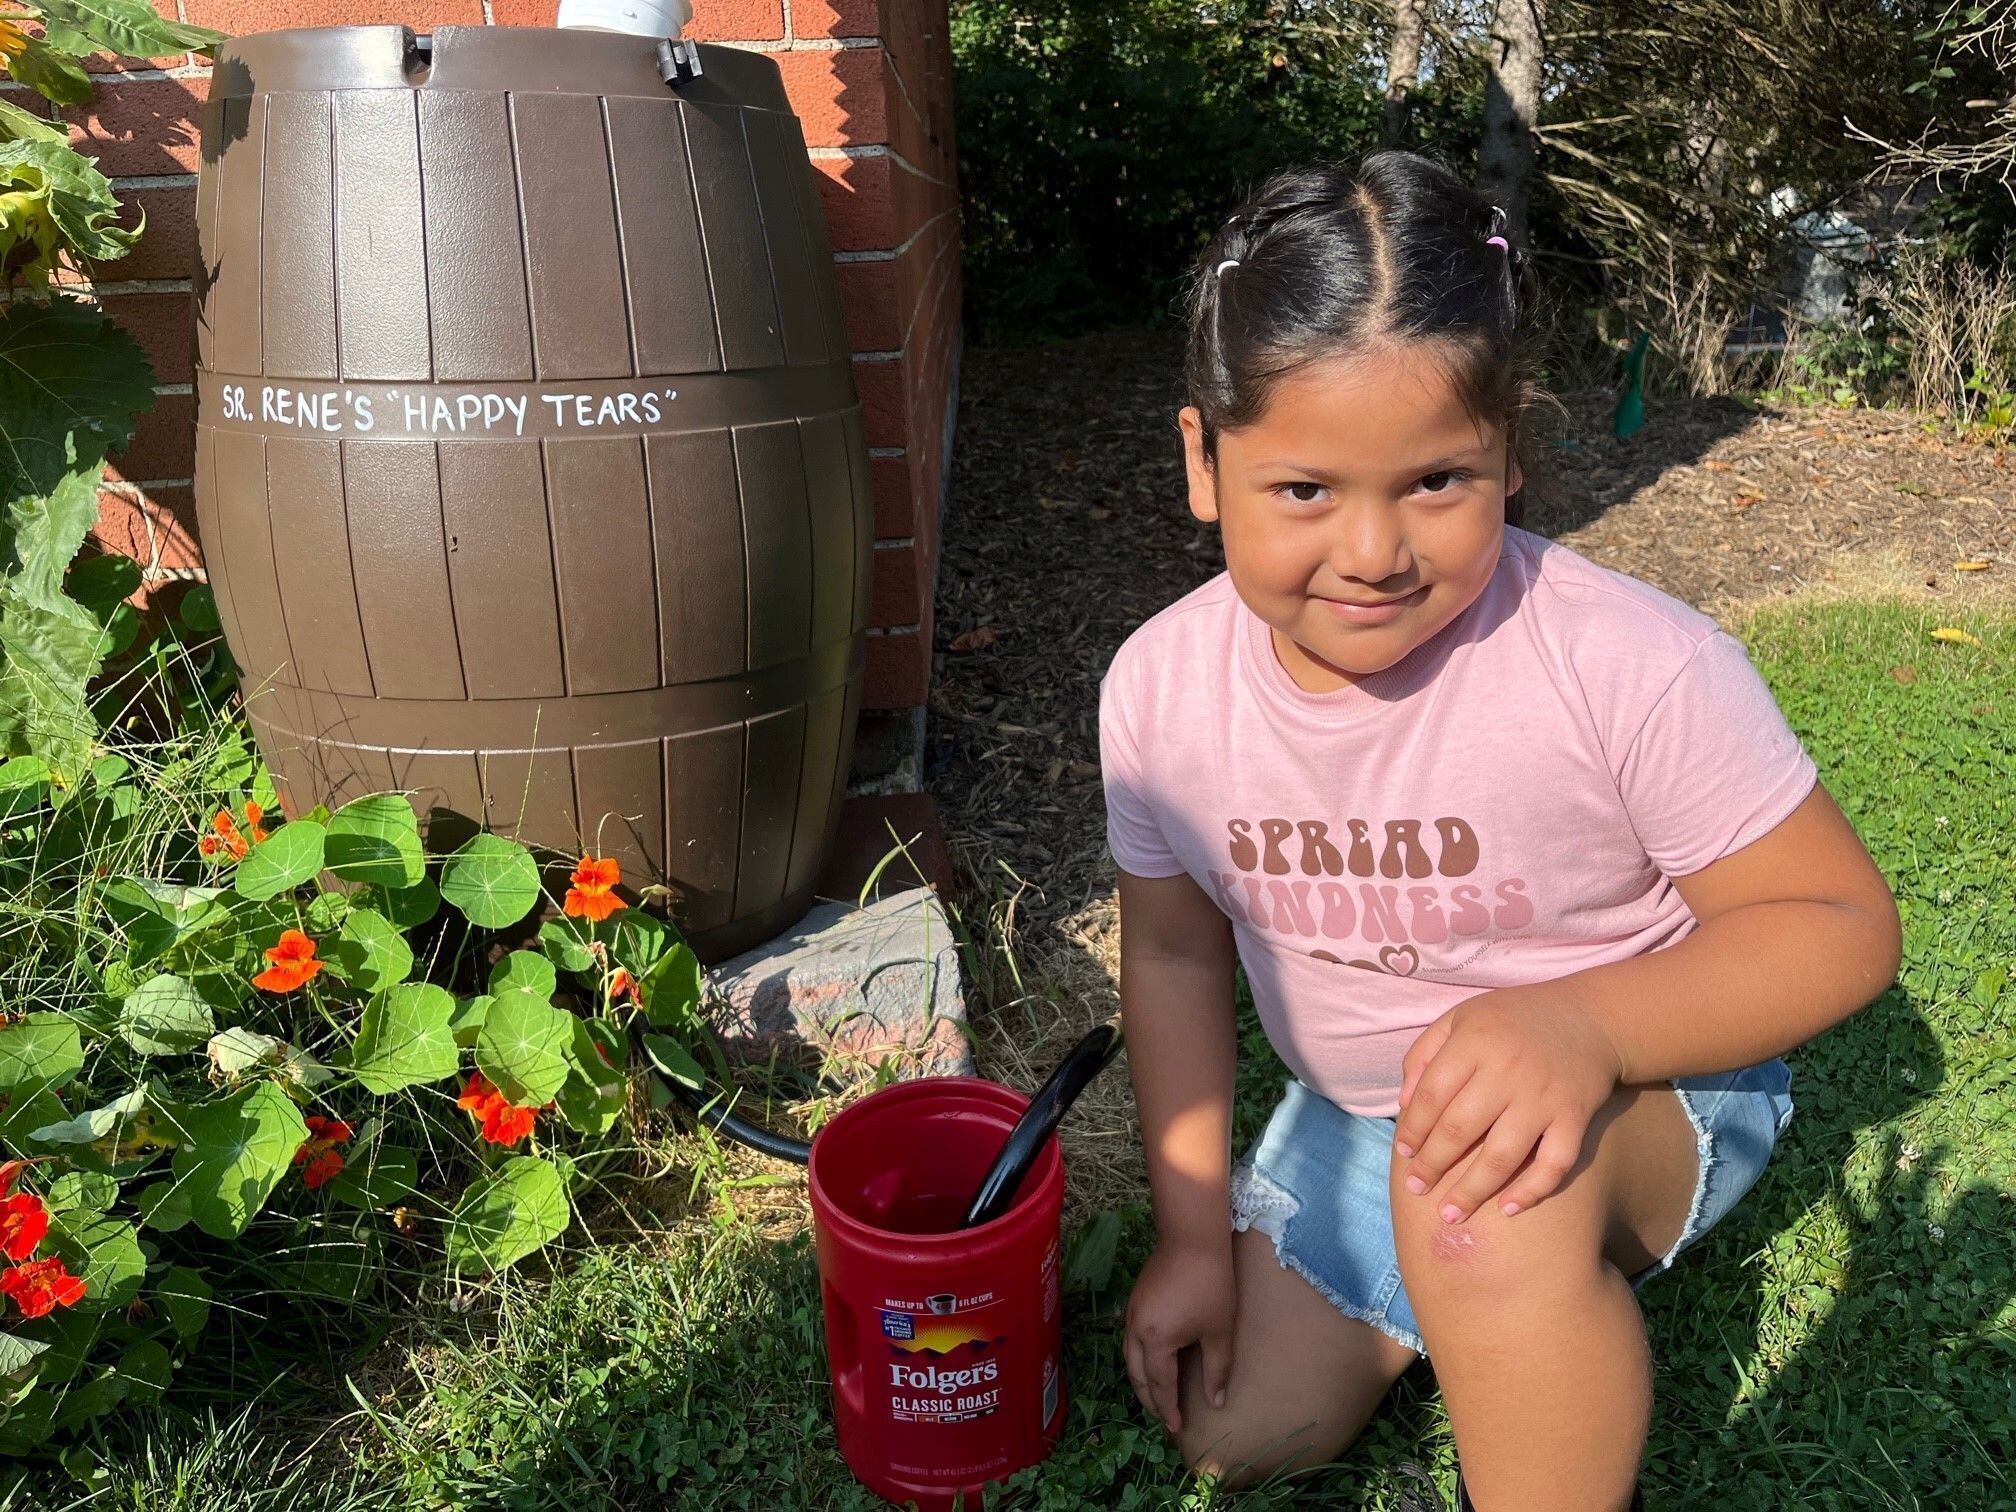 A young girl kneels next to a rain barrel with the words "Sr. Rene's Happy Tears" painted on it. 